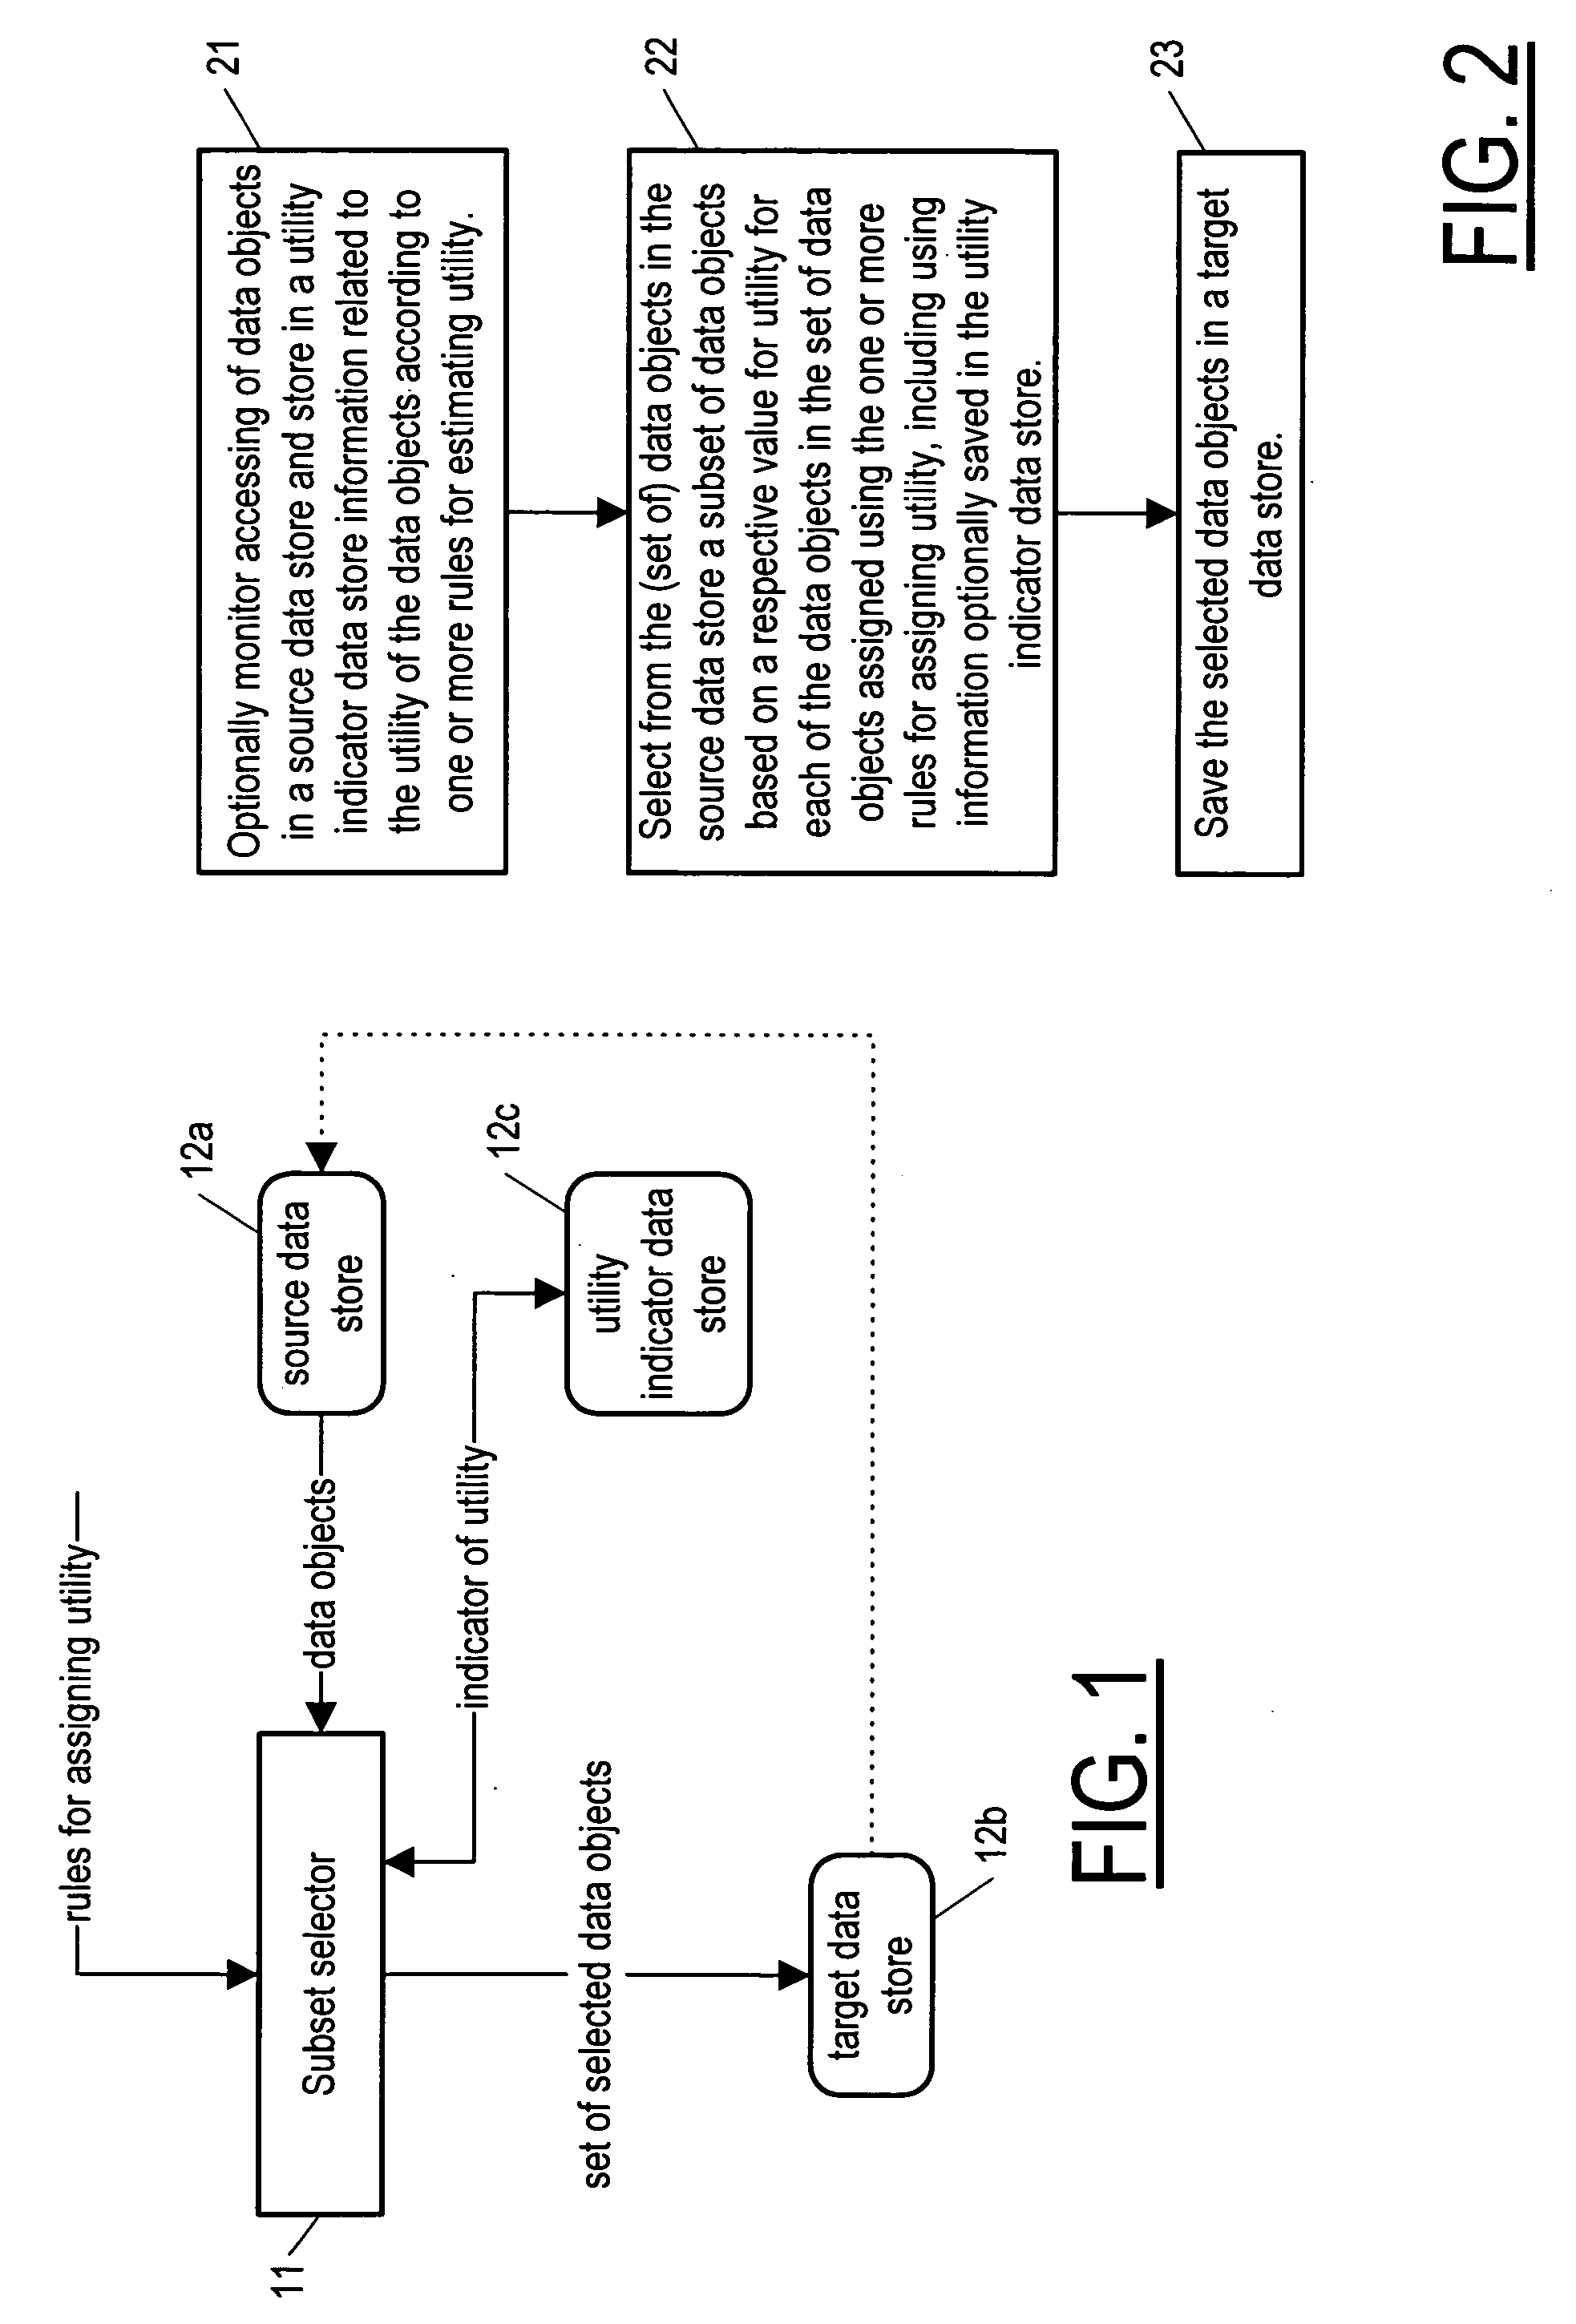 System for selecting data from a data store based on utility of the data